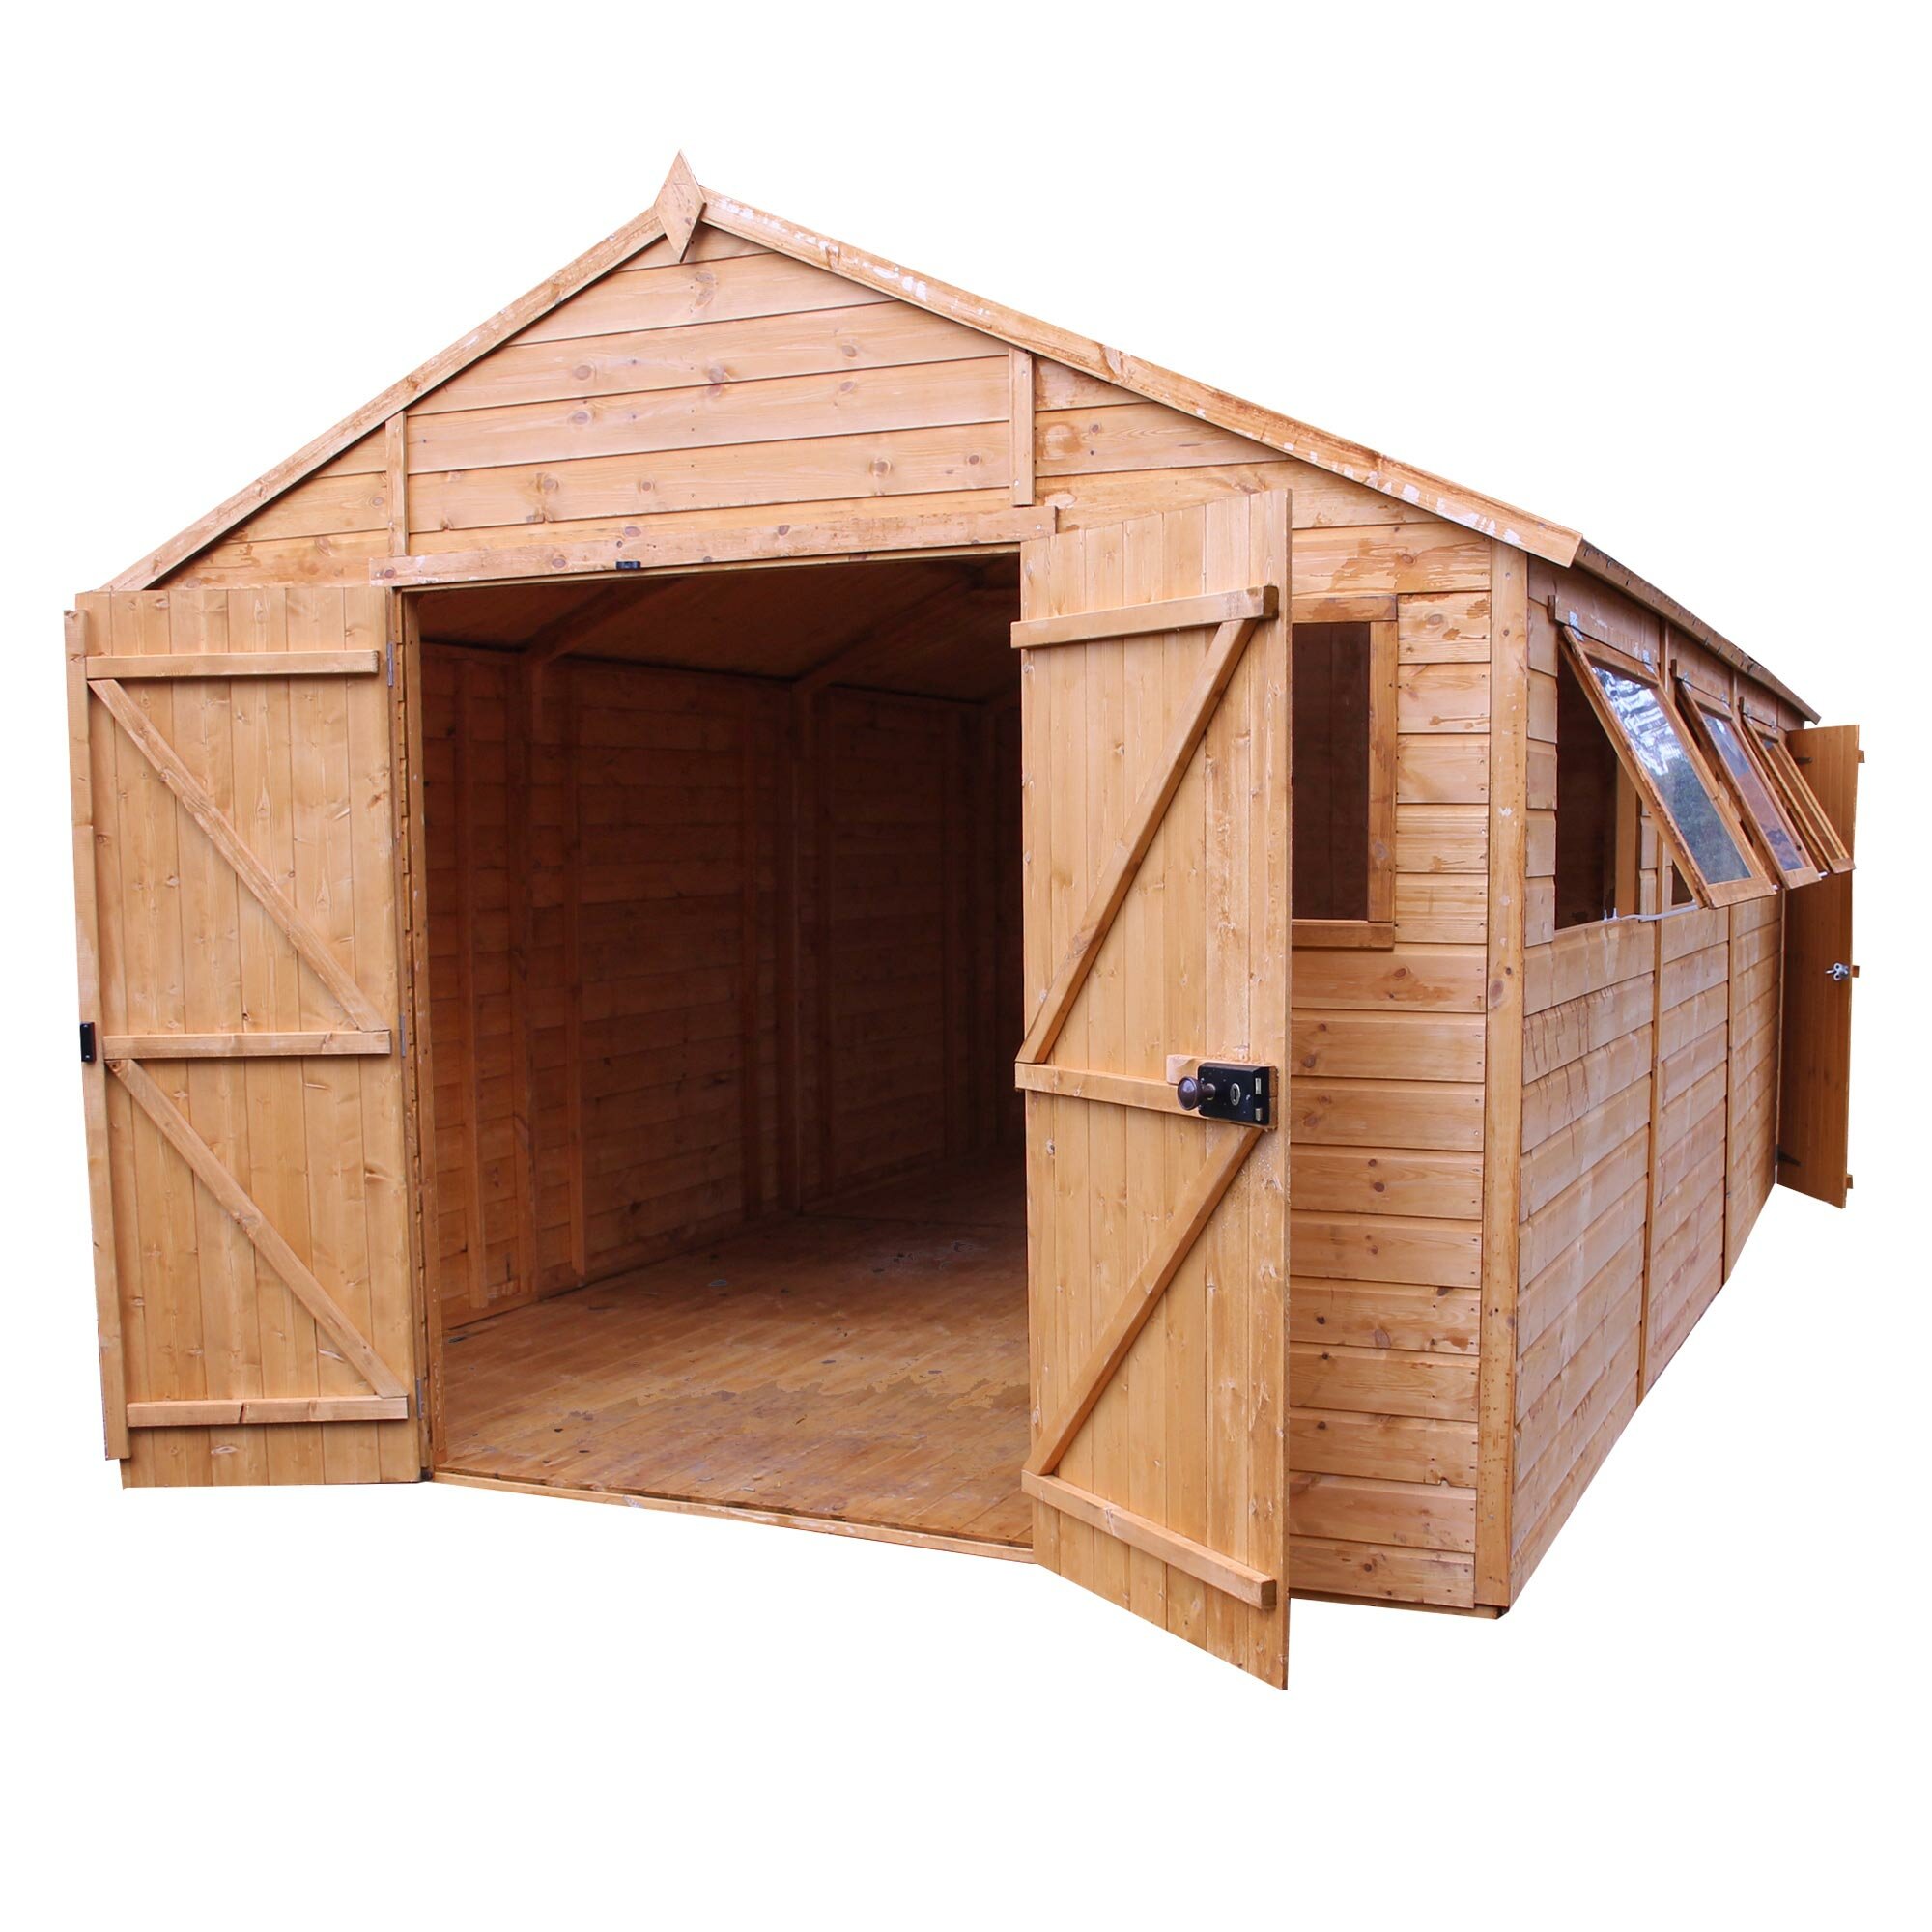 Mercia Garden Products 10.5 Ft. W x 20 Ft. D Wooden Storage Shed 